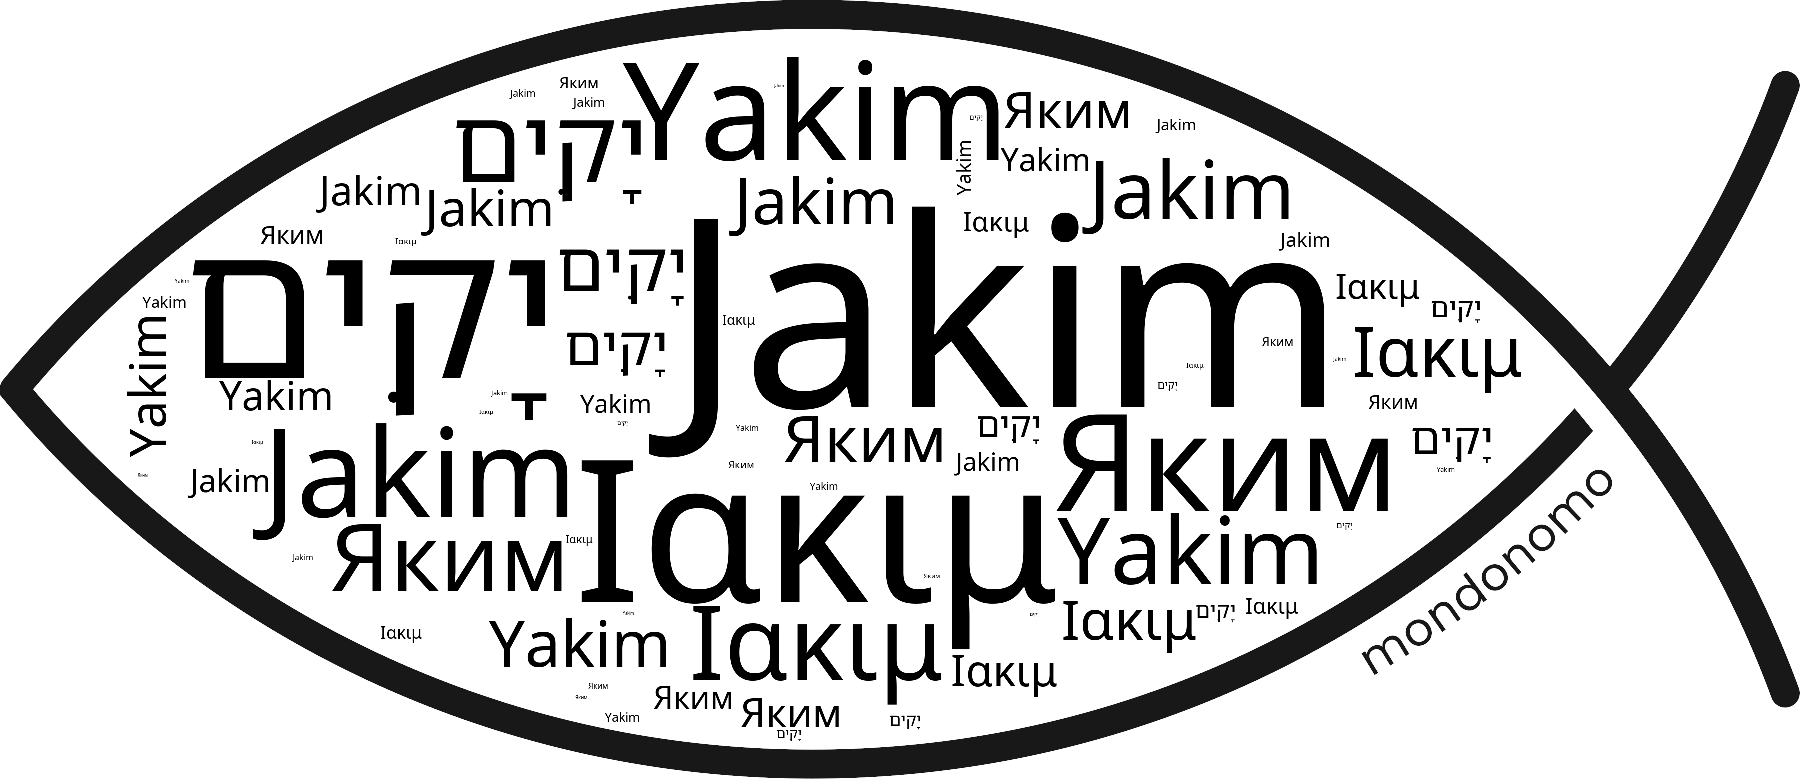 Name Jakim in the world's Bibles